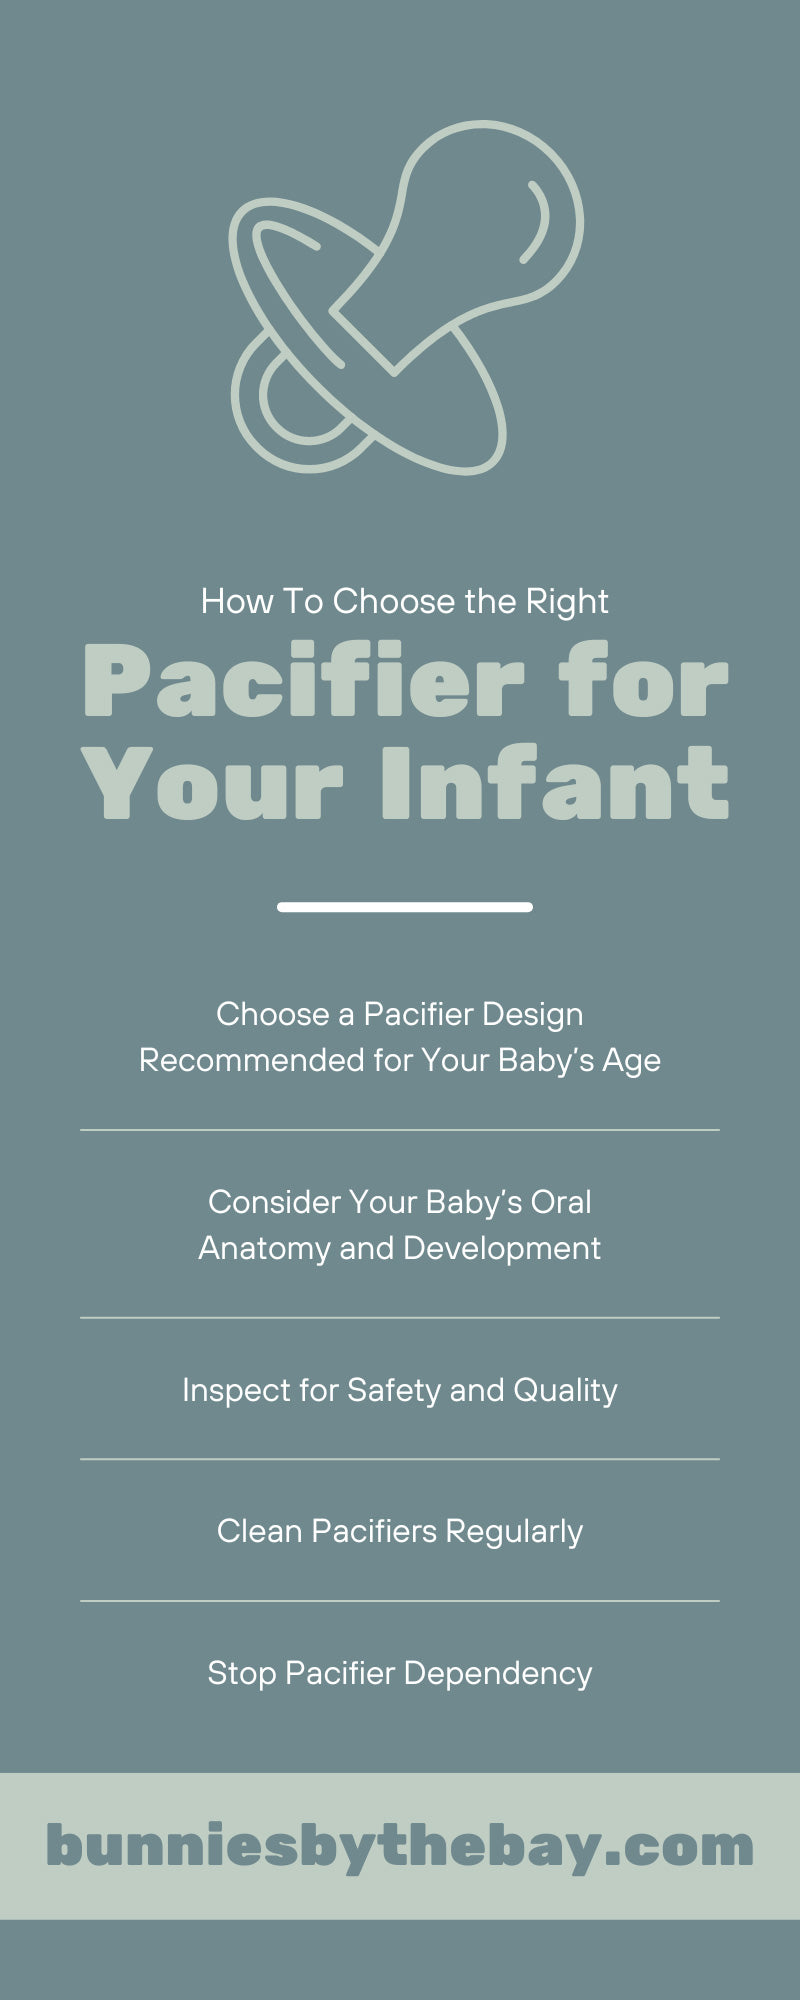 How To Choose the Right Pacifier for Your Infant